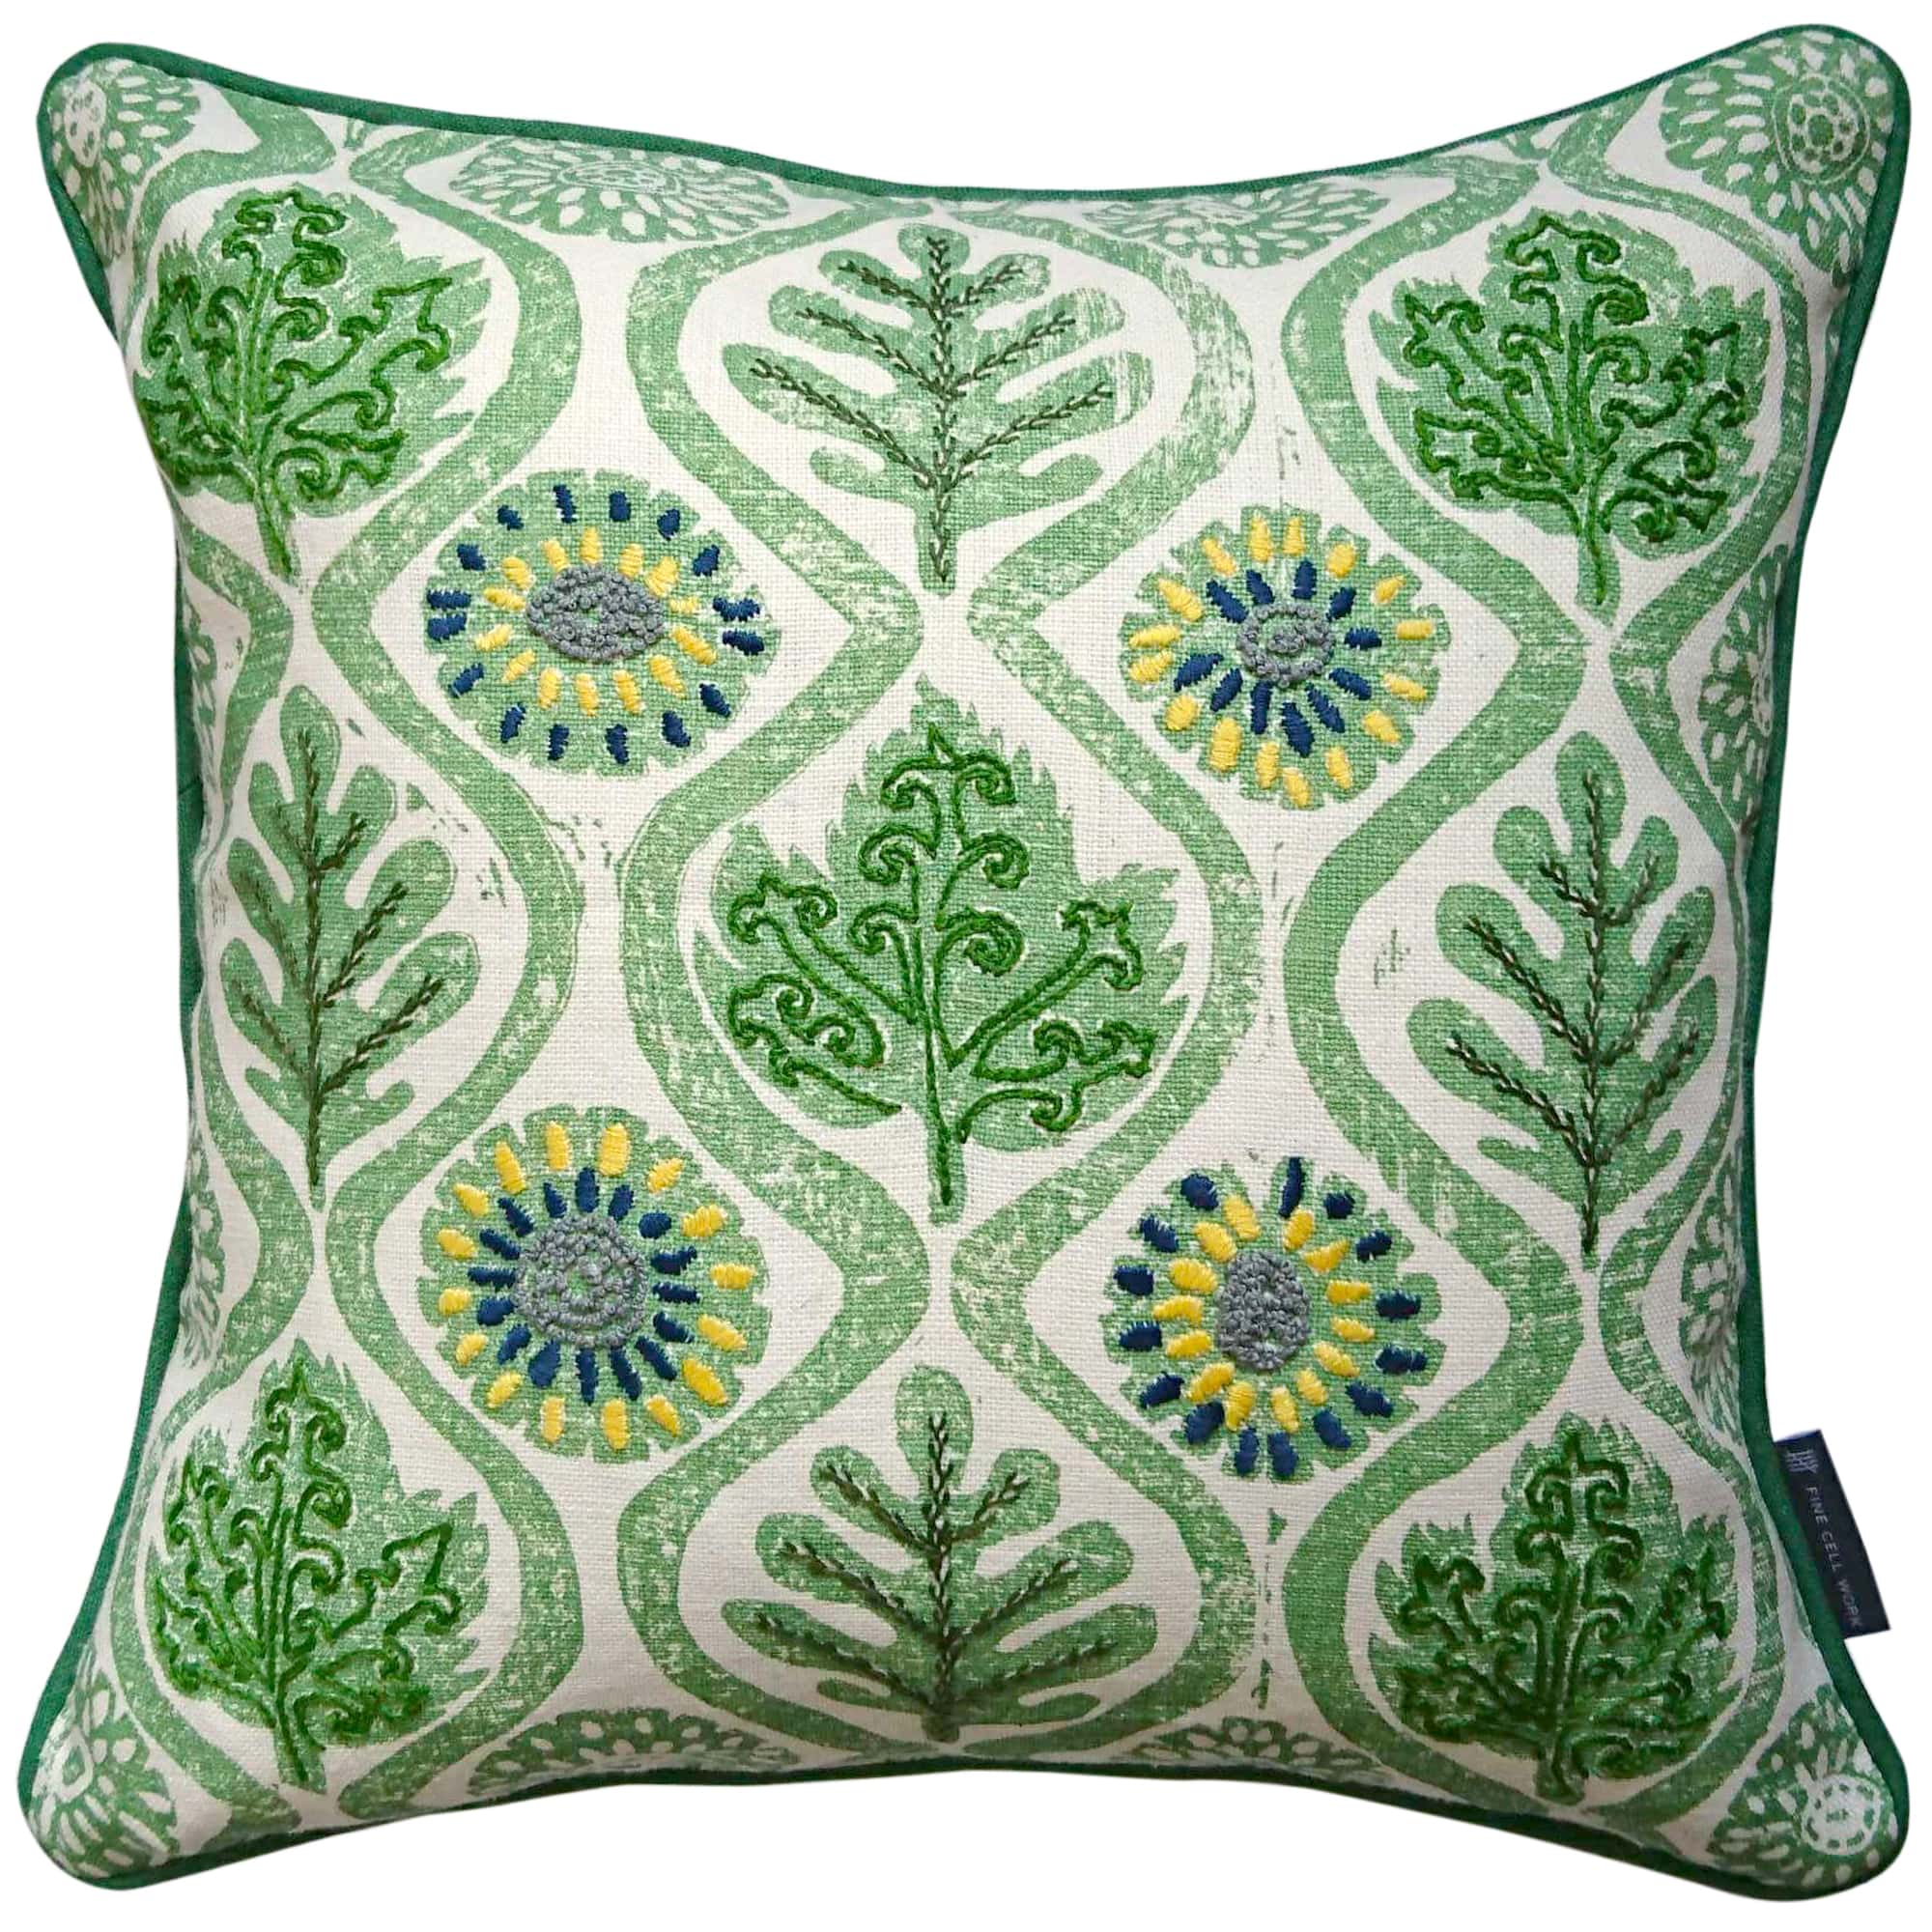 Fine Cell Work Hand-Embroidered Blithfield Kit Kemp Peggy Angus Oakleaves Irish Linen Cushion Yellow Leaf Green Handmade in Prison